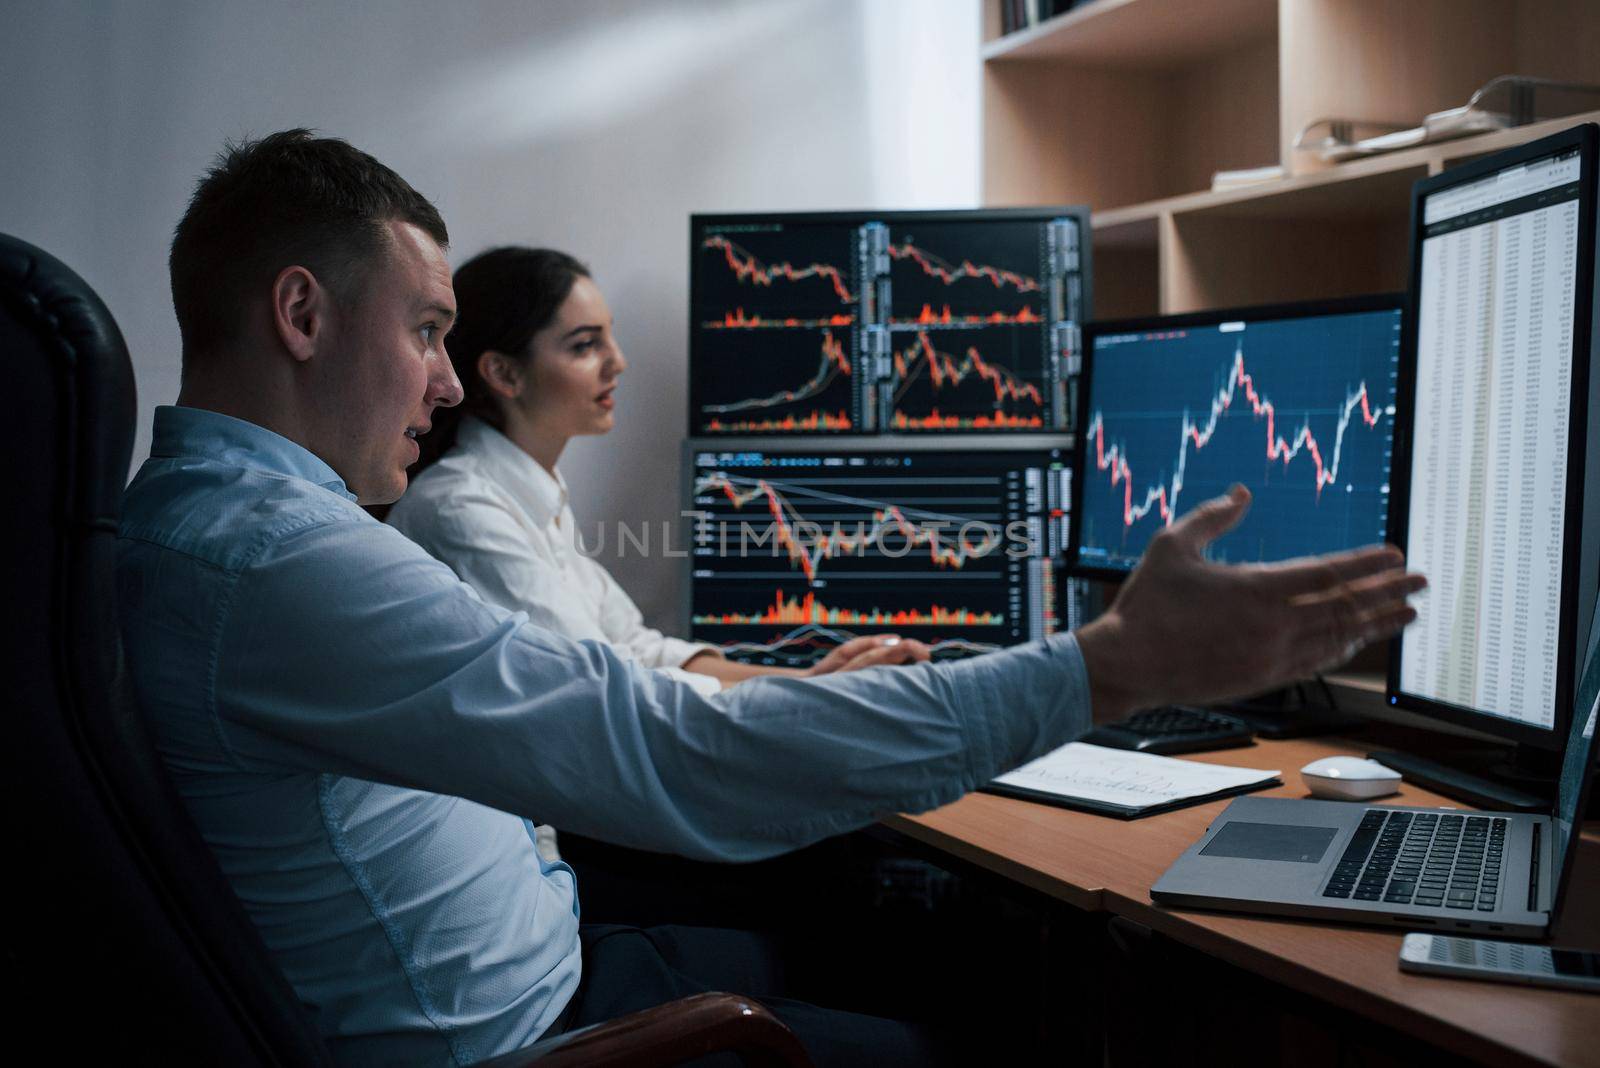 Team of stockbrokers are having a conversation in a office with multiple display screens.